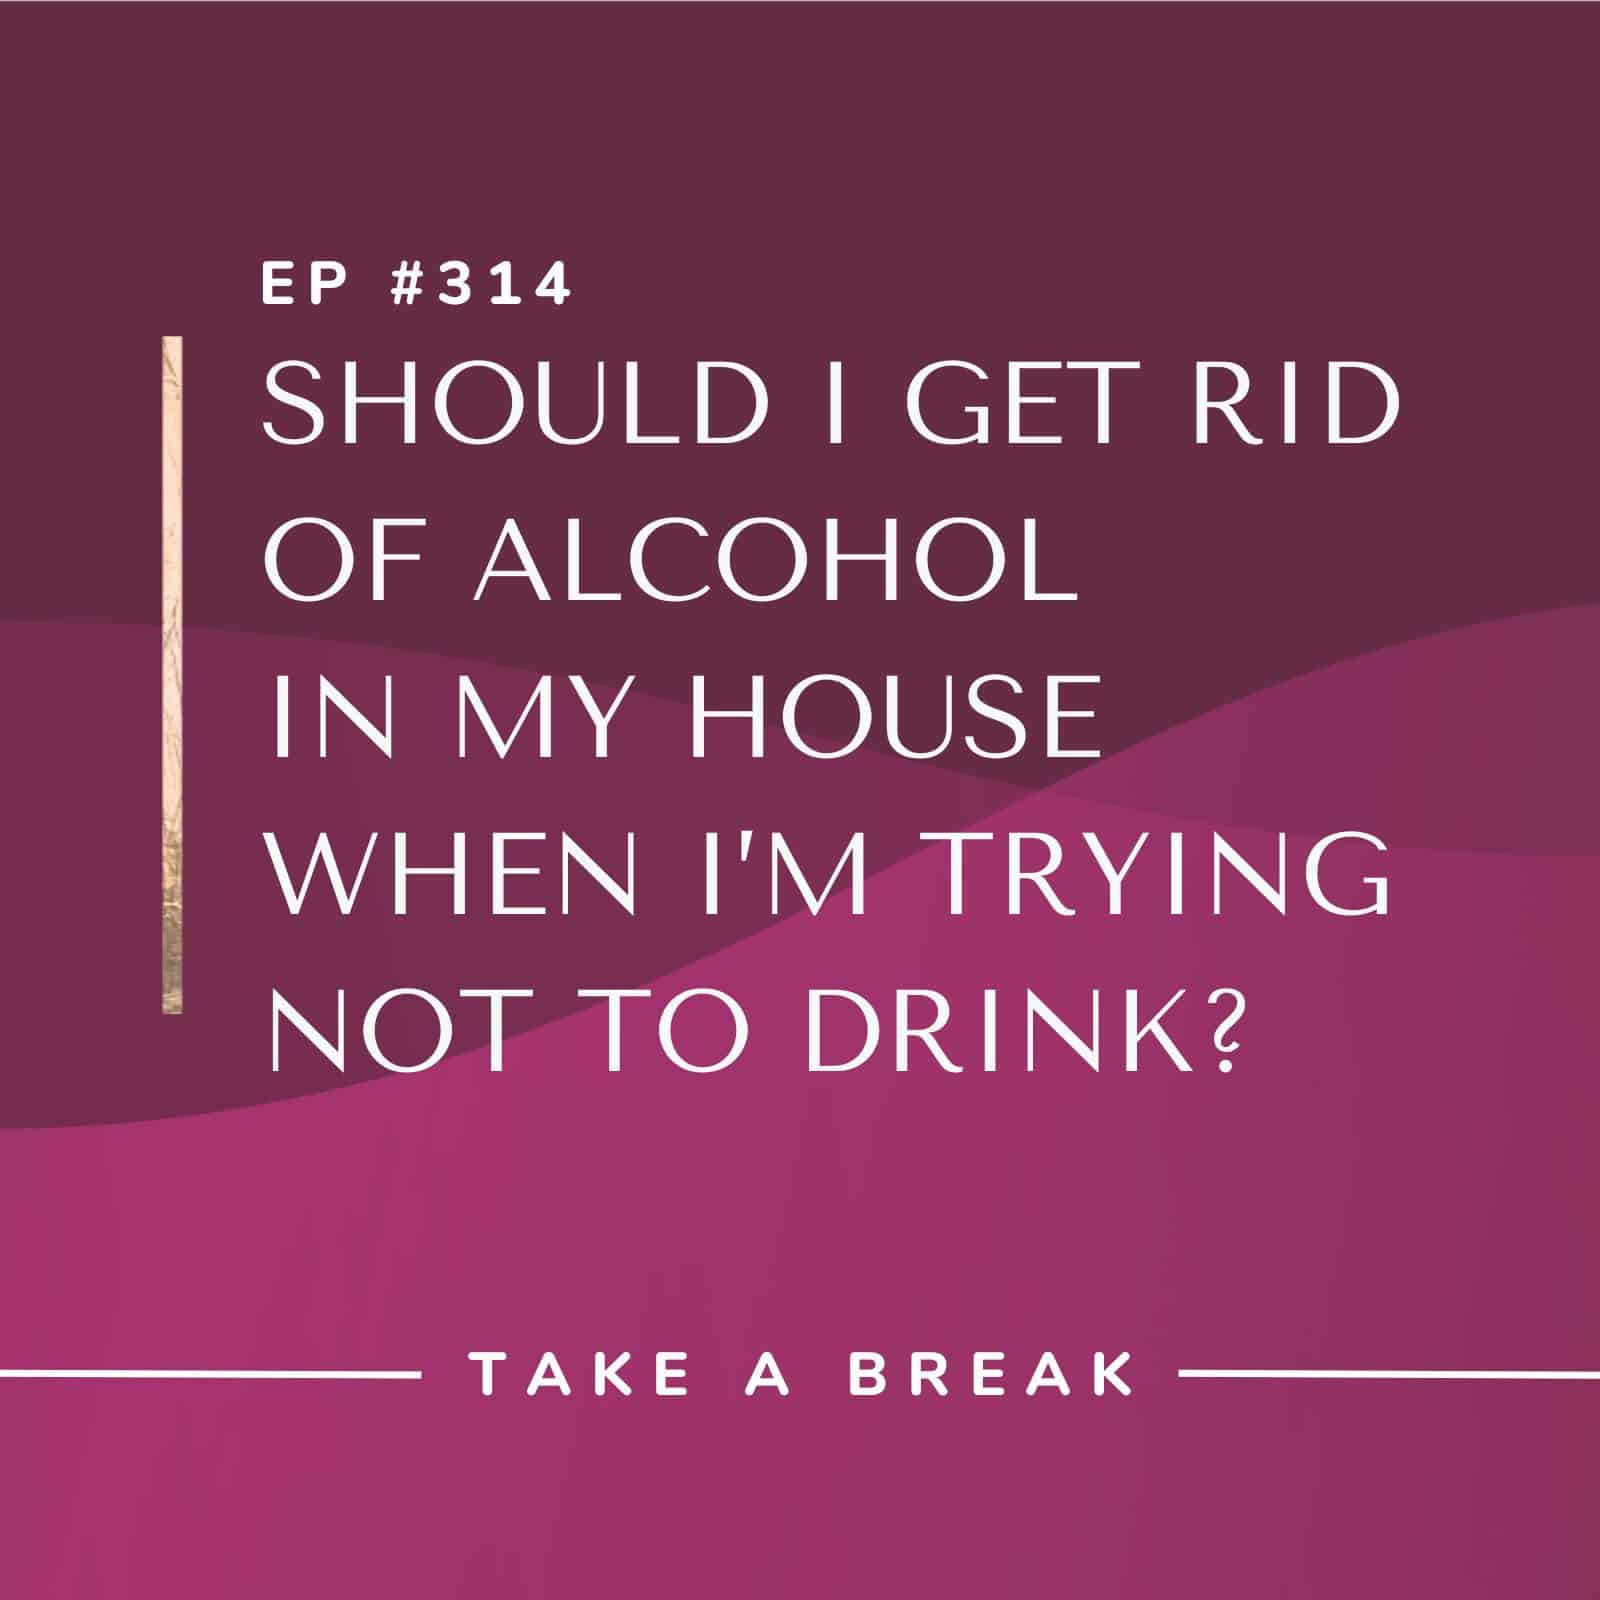 Take A Break from Drinking | Should I Get Rid of Alcohol in My House When I’m Trying Not to Drink?